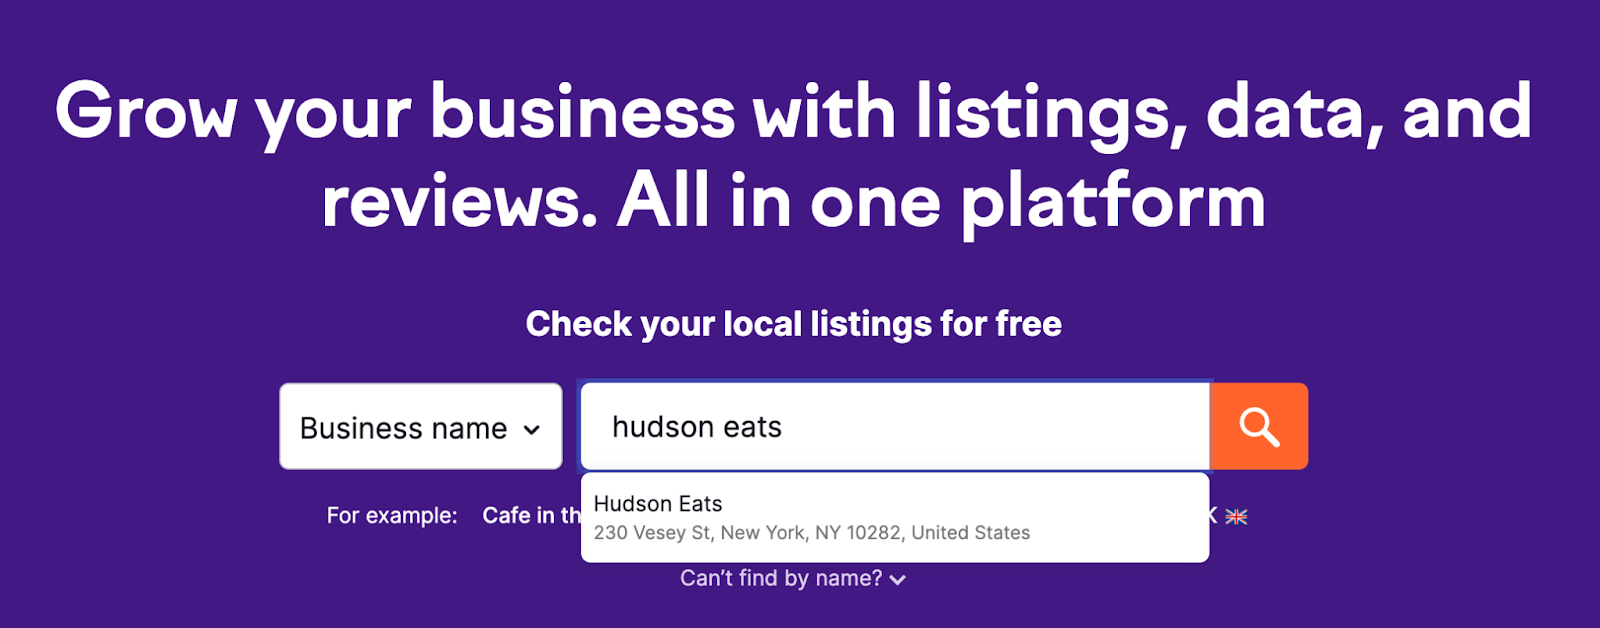 search for "hudson eats" in Listing Management tool